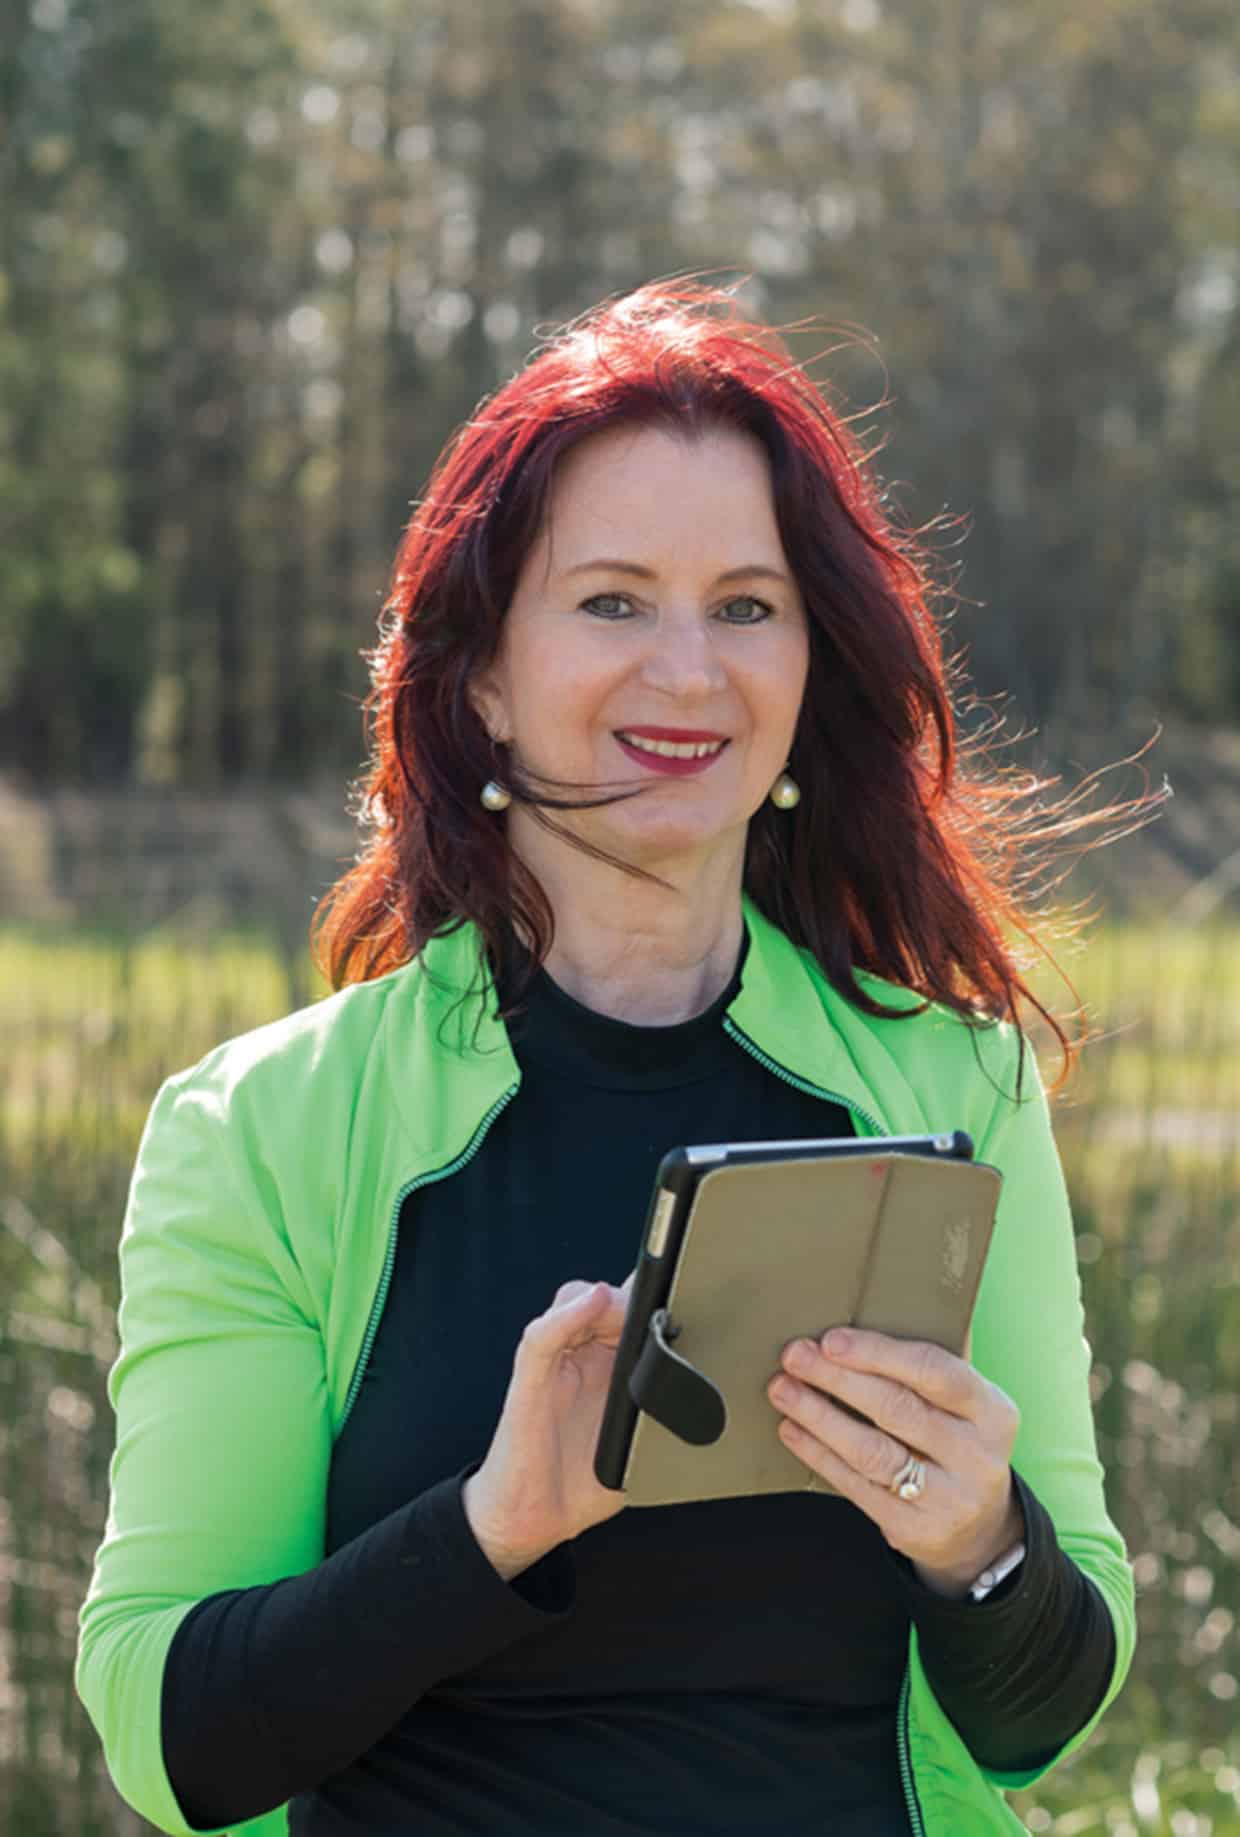 A woman outside smiling, holding a tablet